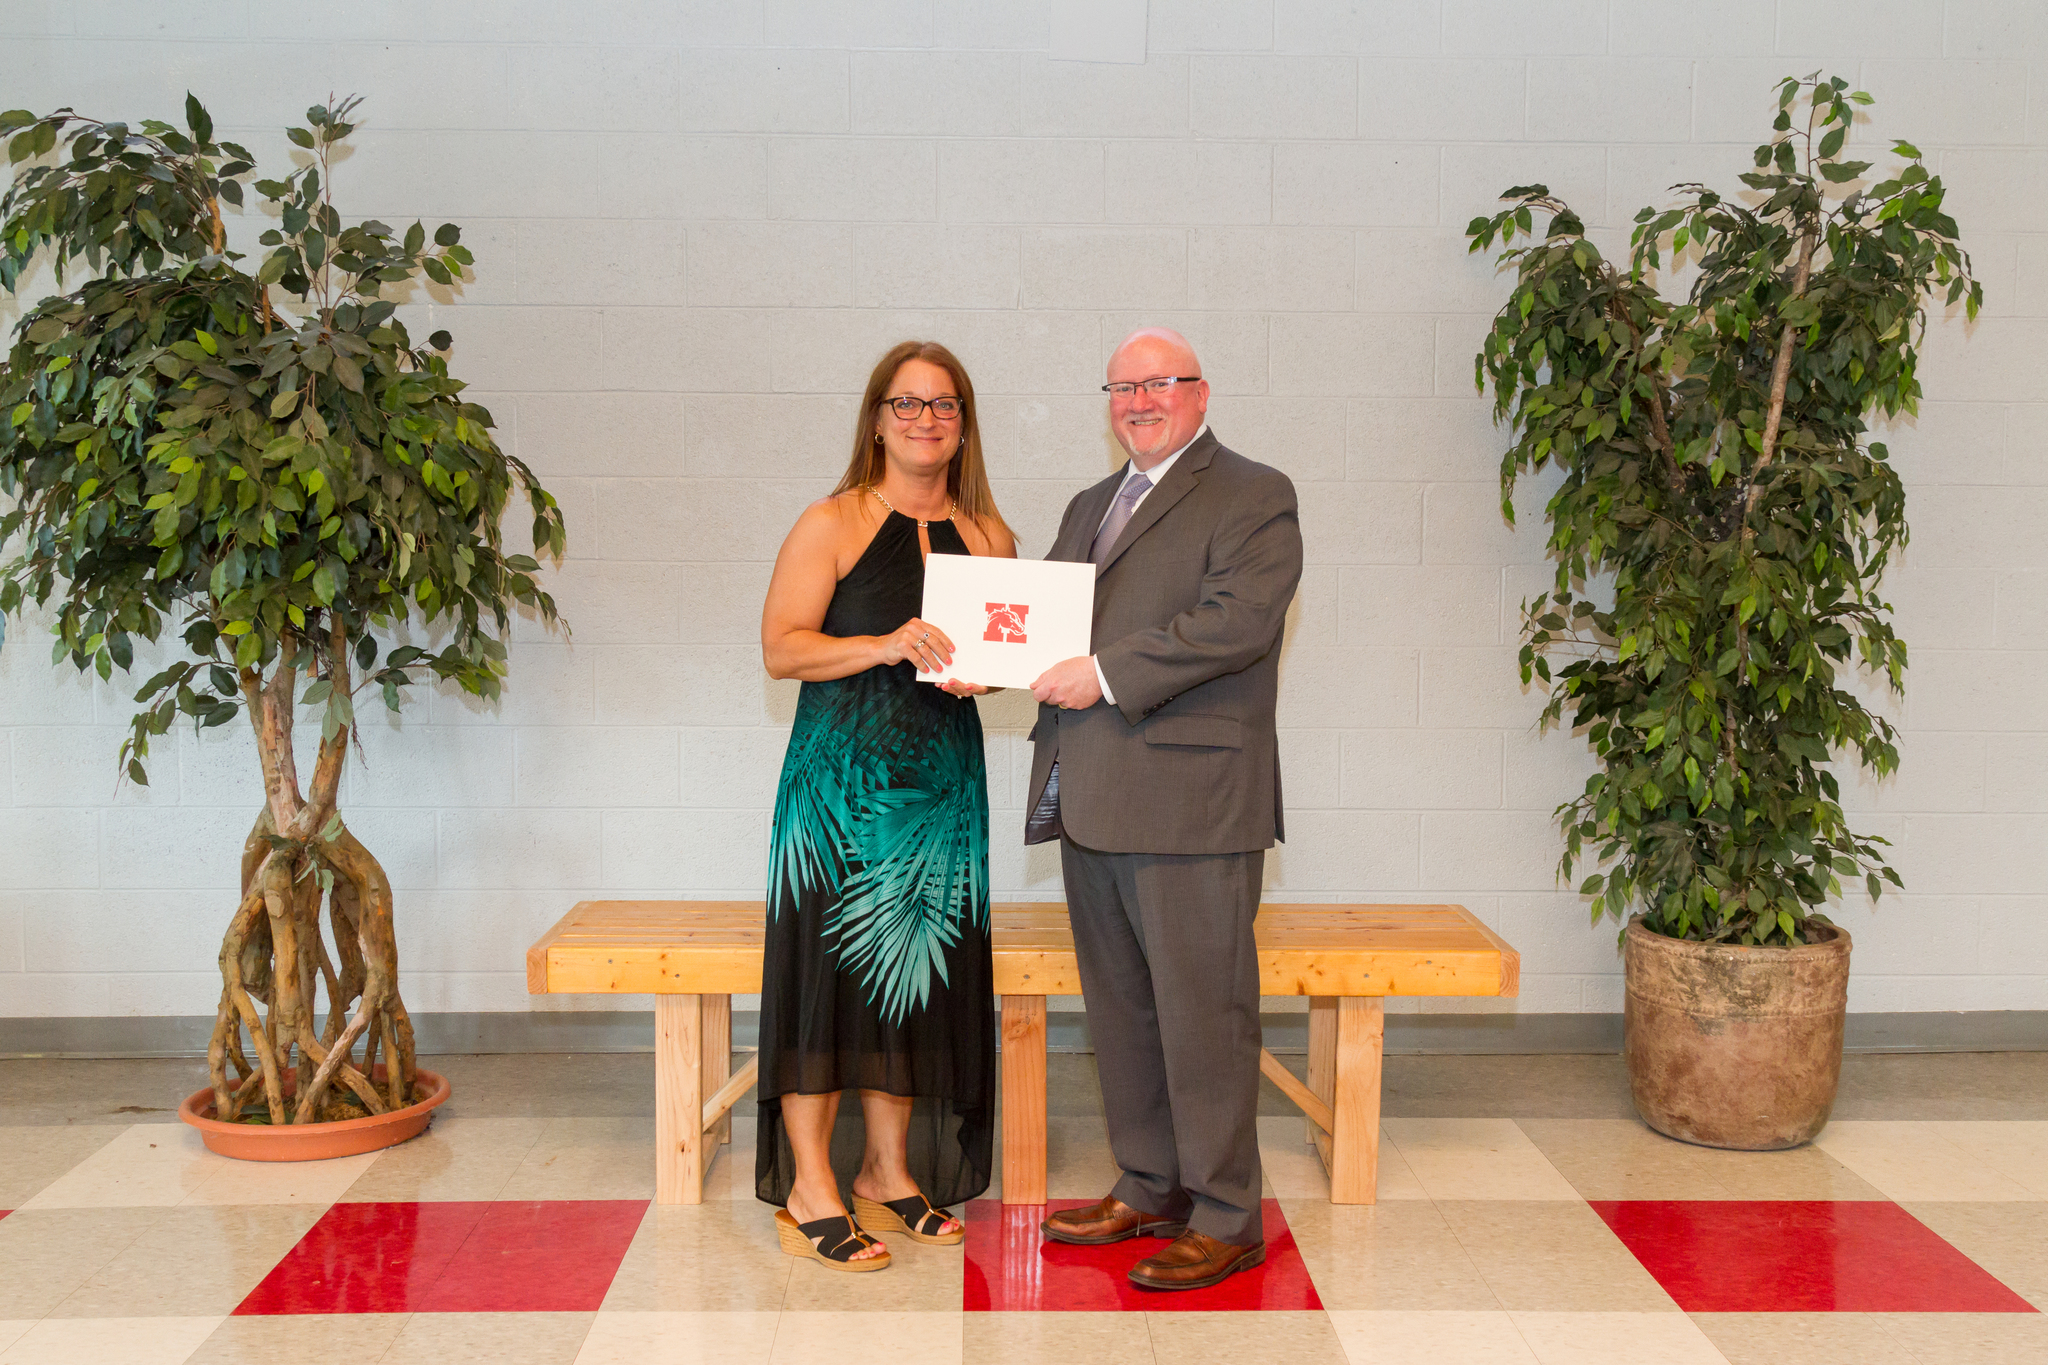 Ms. Robb and the Board President holding award